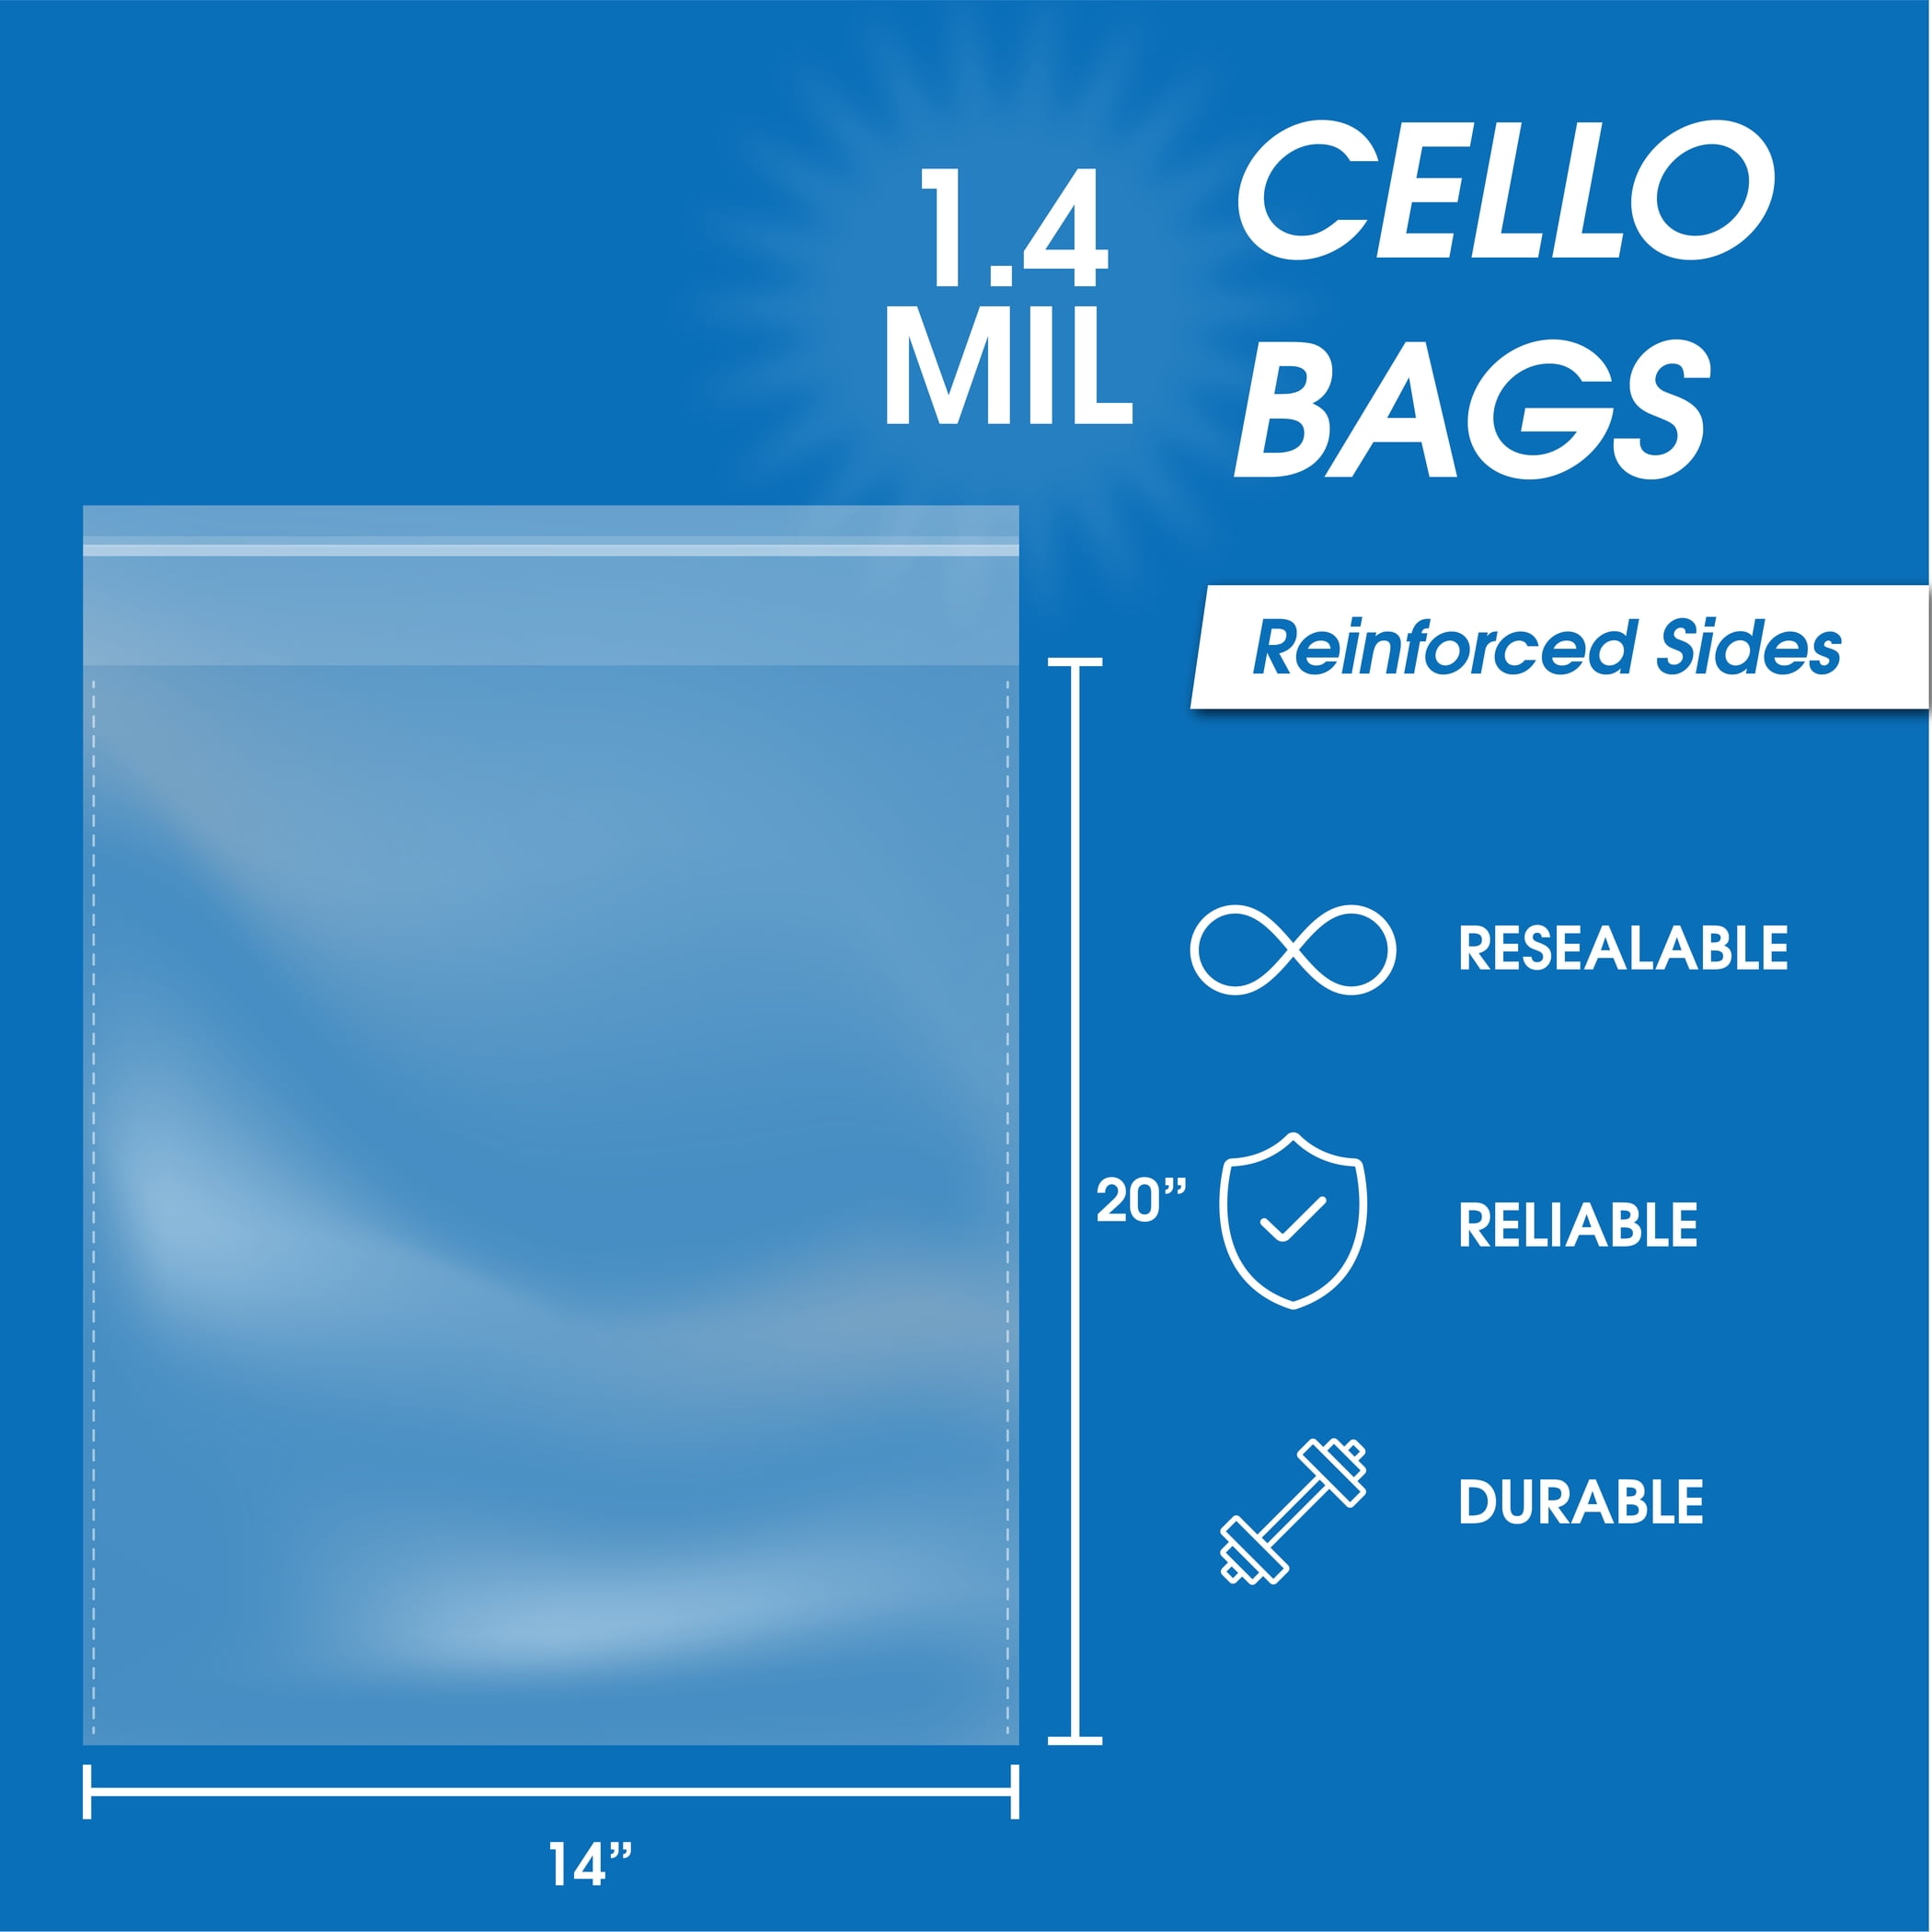 Clear Beverage Bags (Case of 100) $0.79/Each – RP and Associates